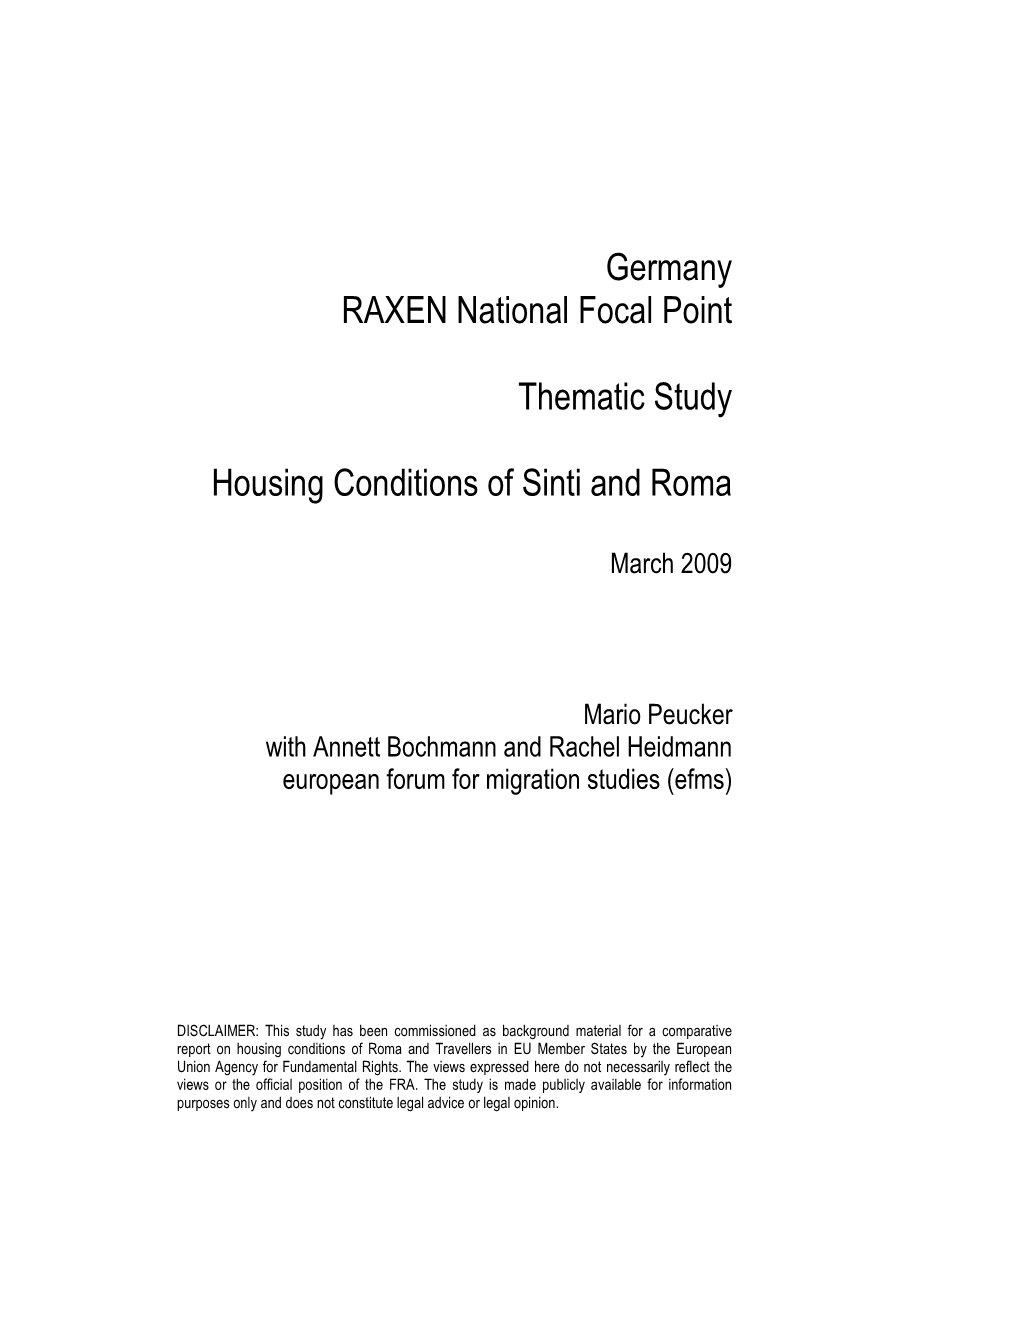 Housing Conditions of Sinti and Roma. Germany